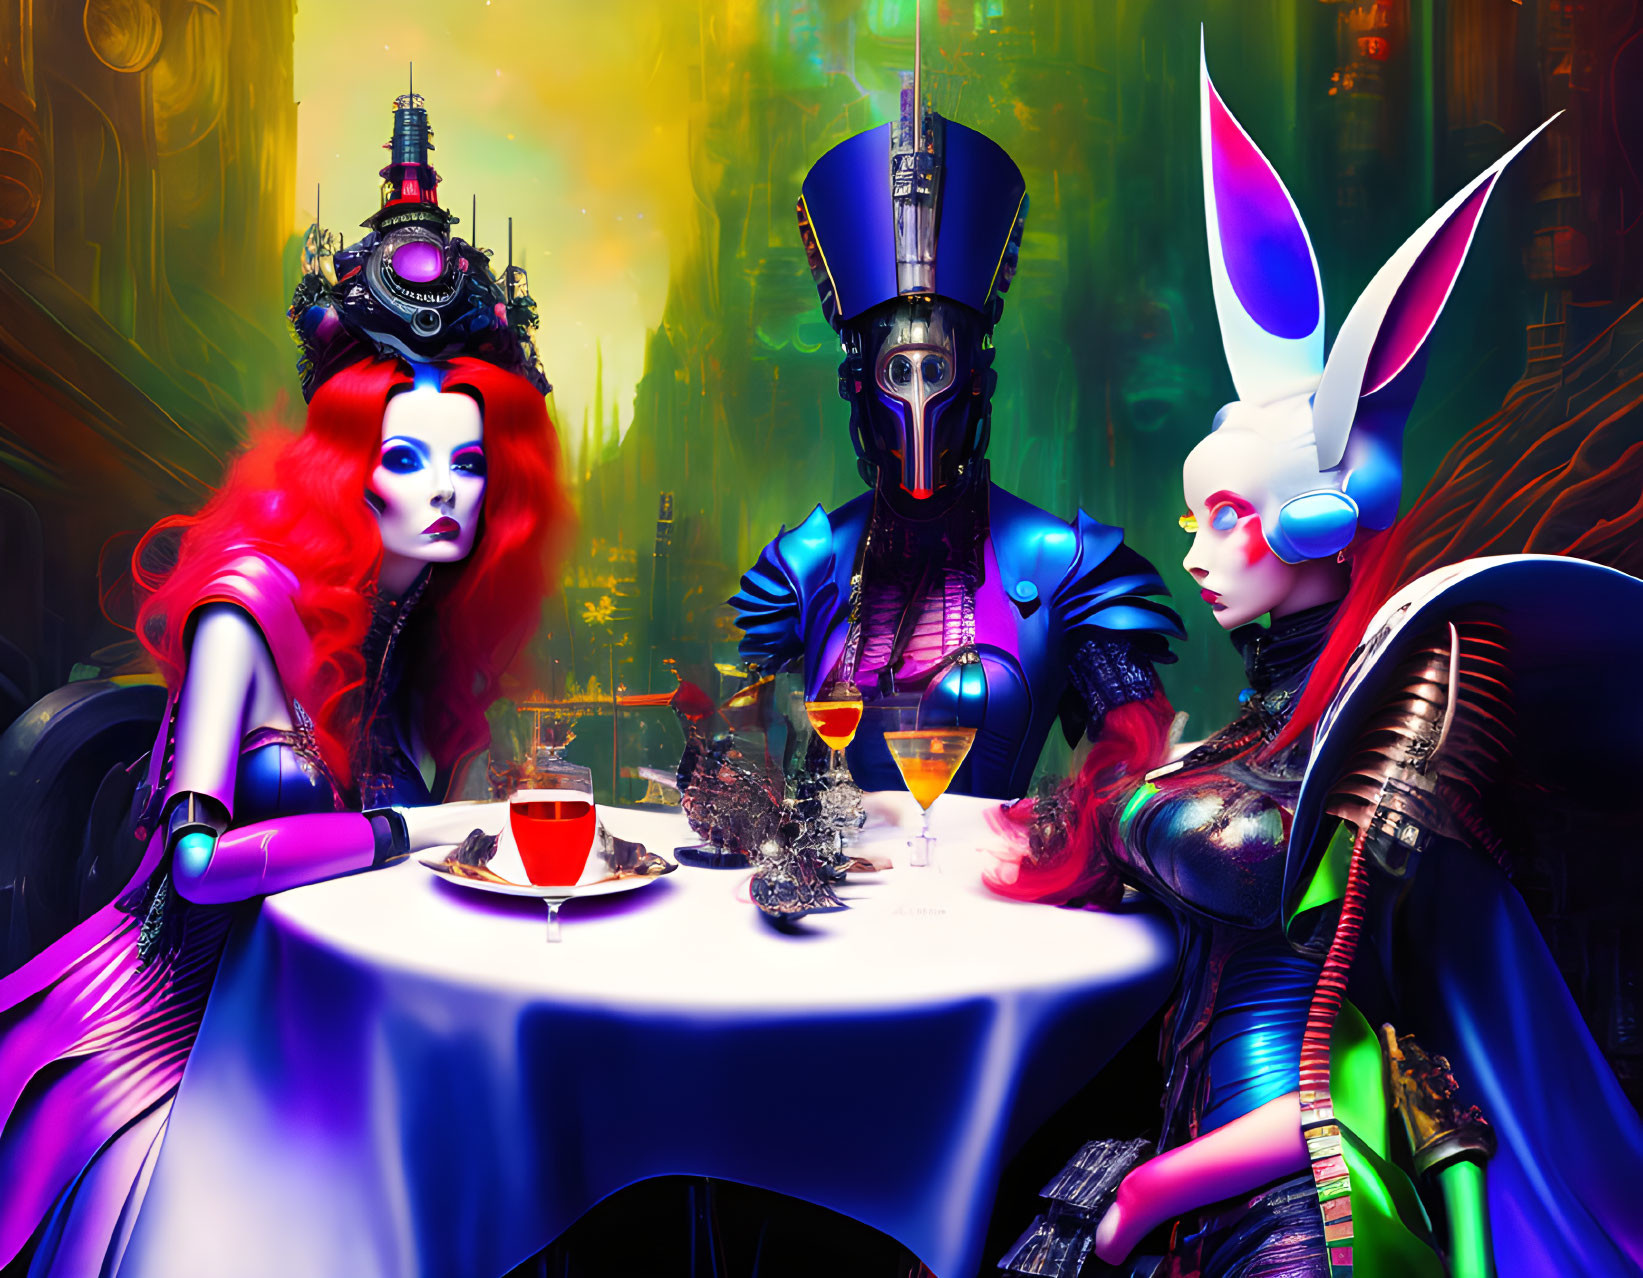 Three futuristic characters in elaborate costumes and hairstyles at a neon-lit cyberpunk table.